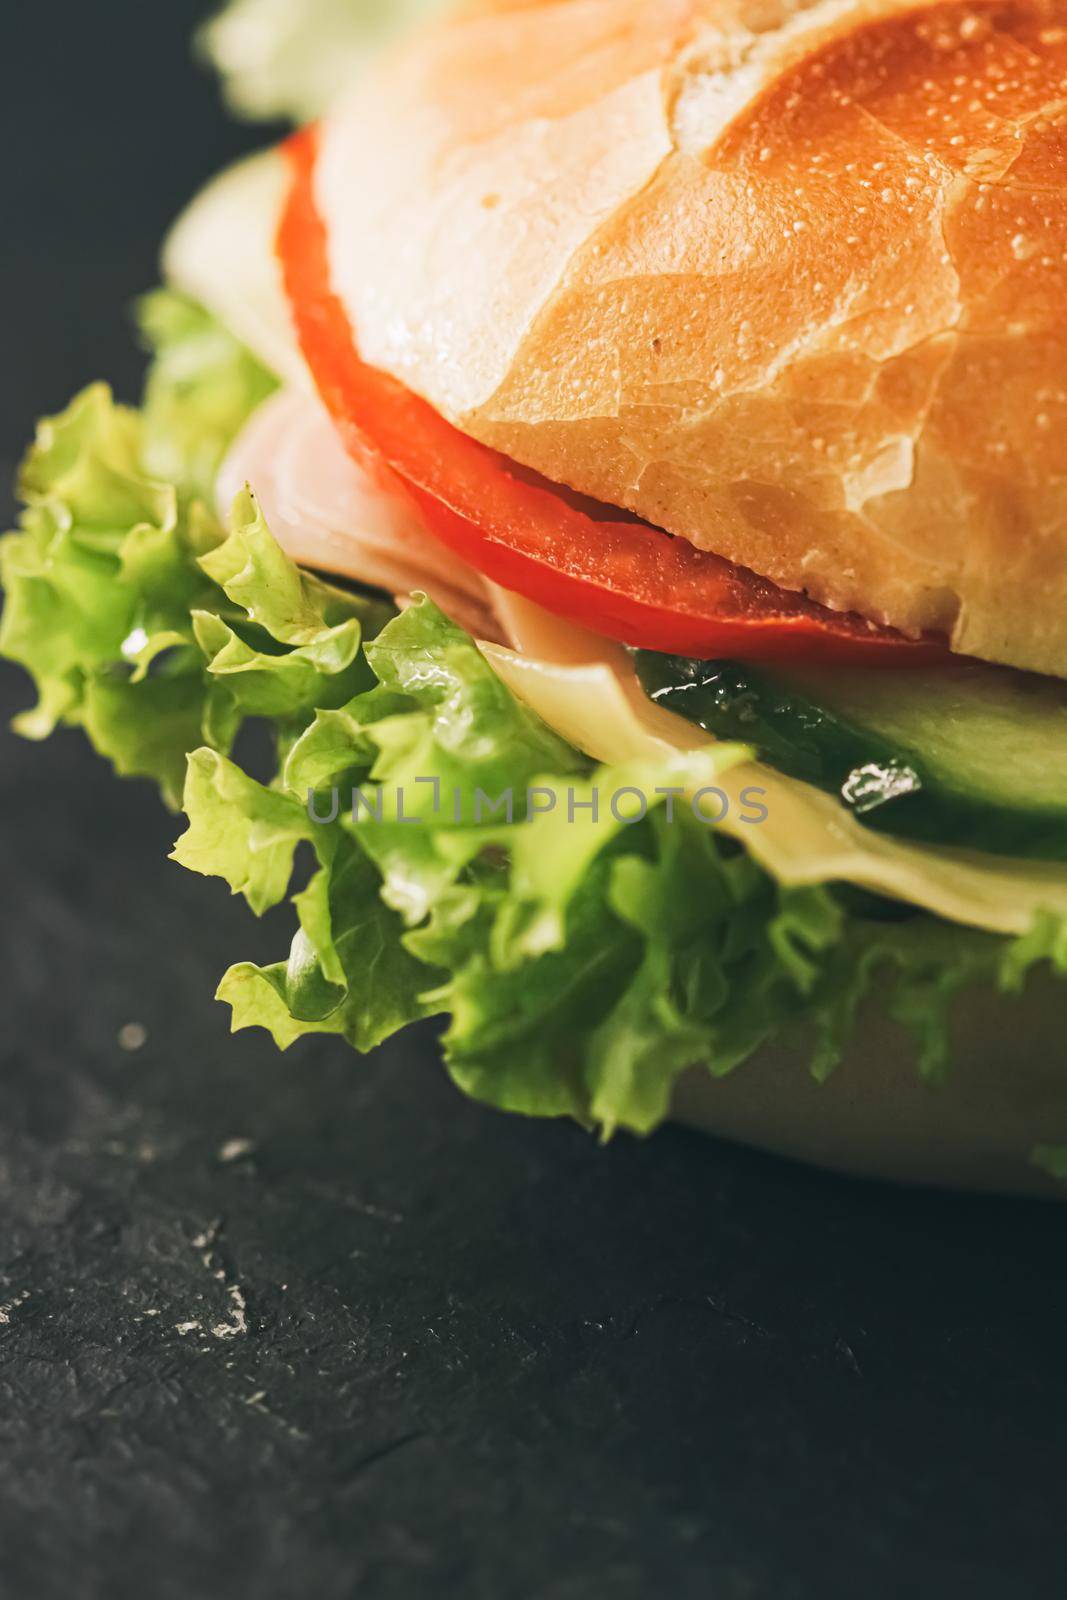 Sandwich with ham, cheese, veggies and lettuce, fast food closeup